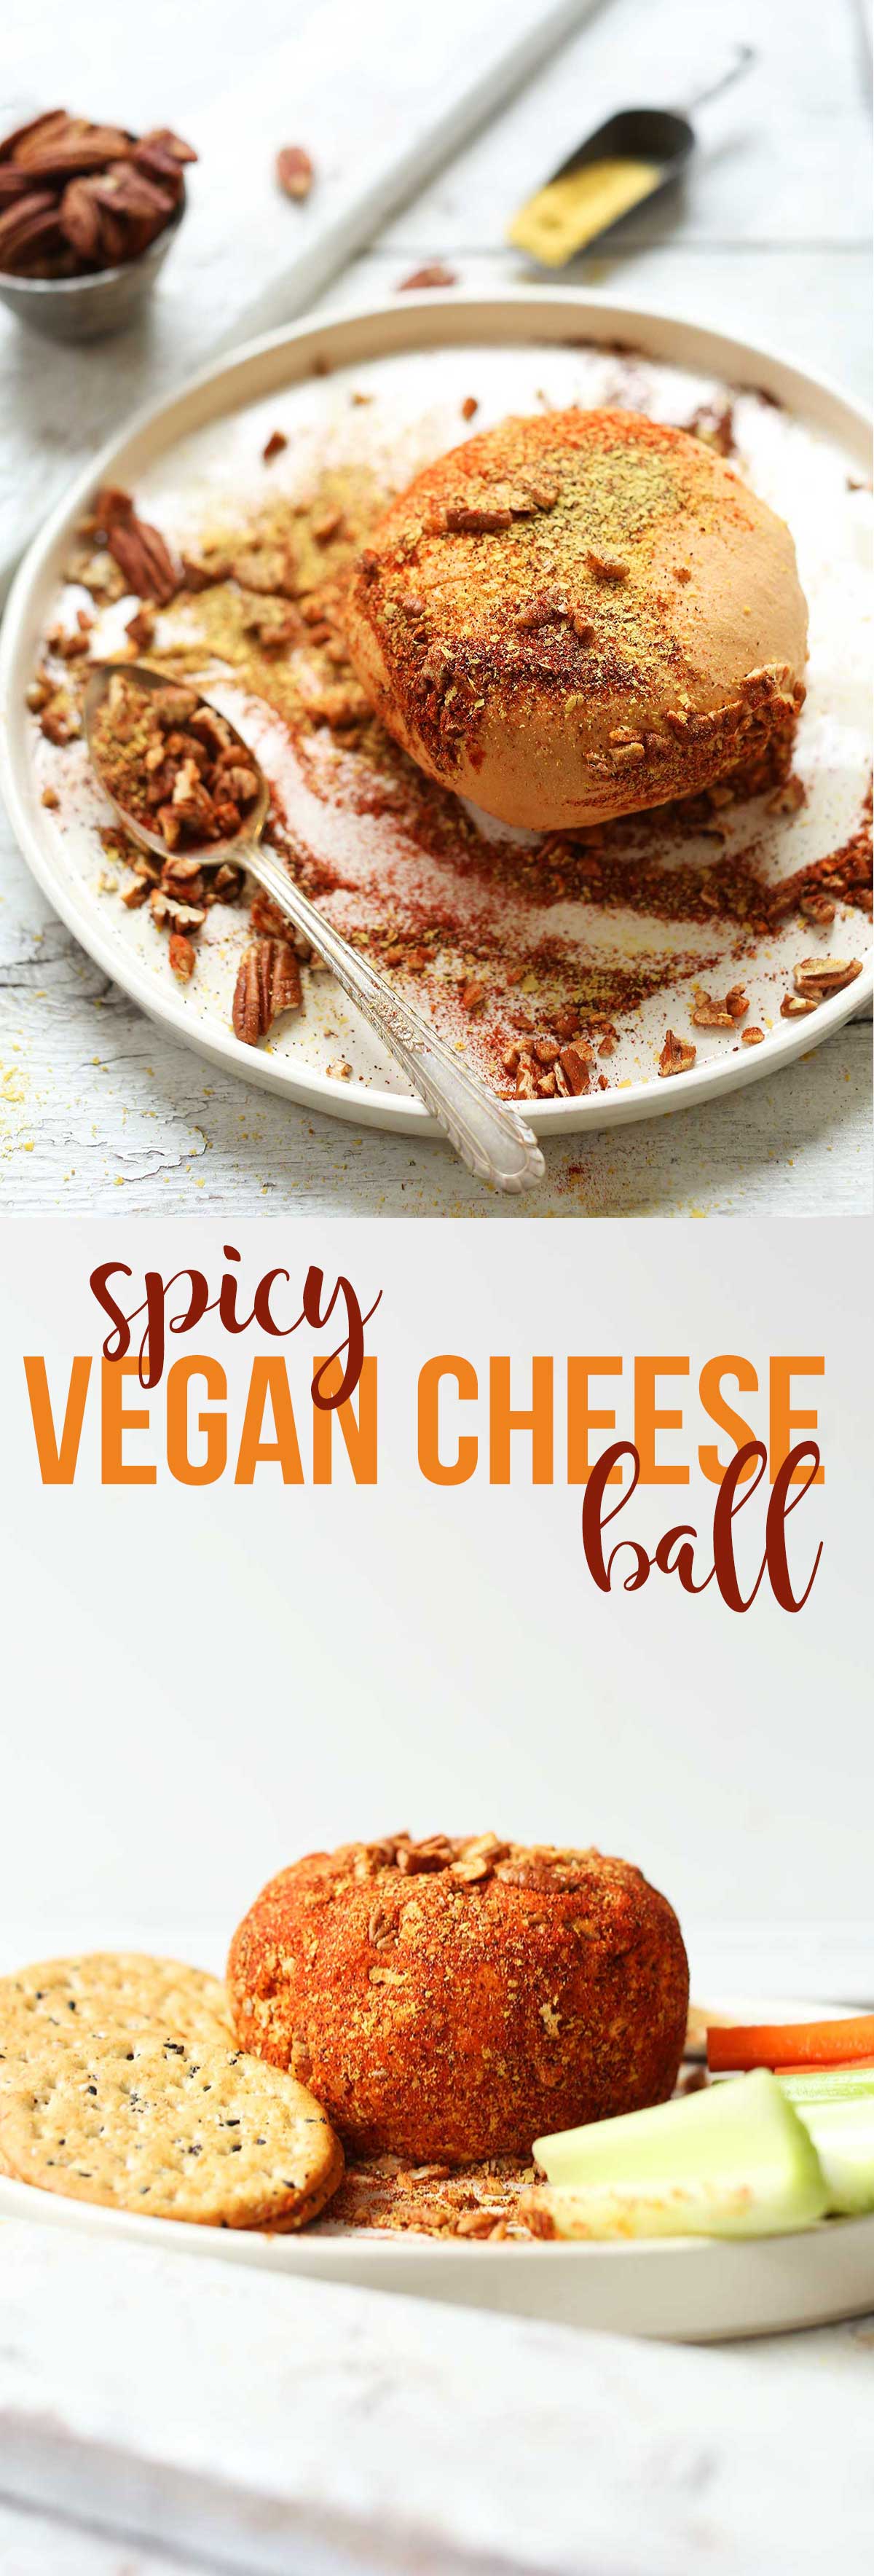 Spicy-vegan-cheese-ball-simple-ingredients-perfect-for-the-holidays-vegan-glutenfree-cheese